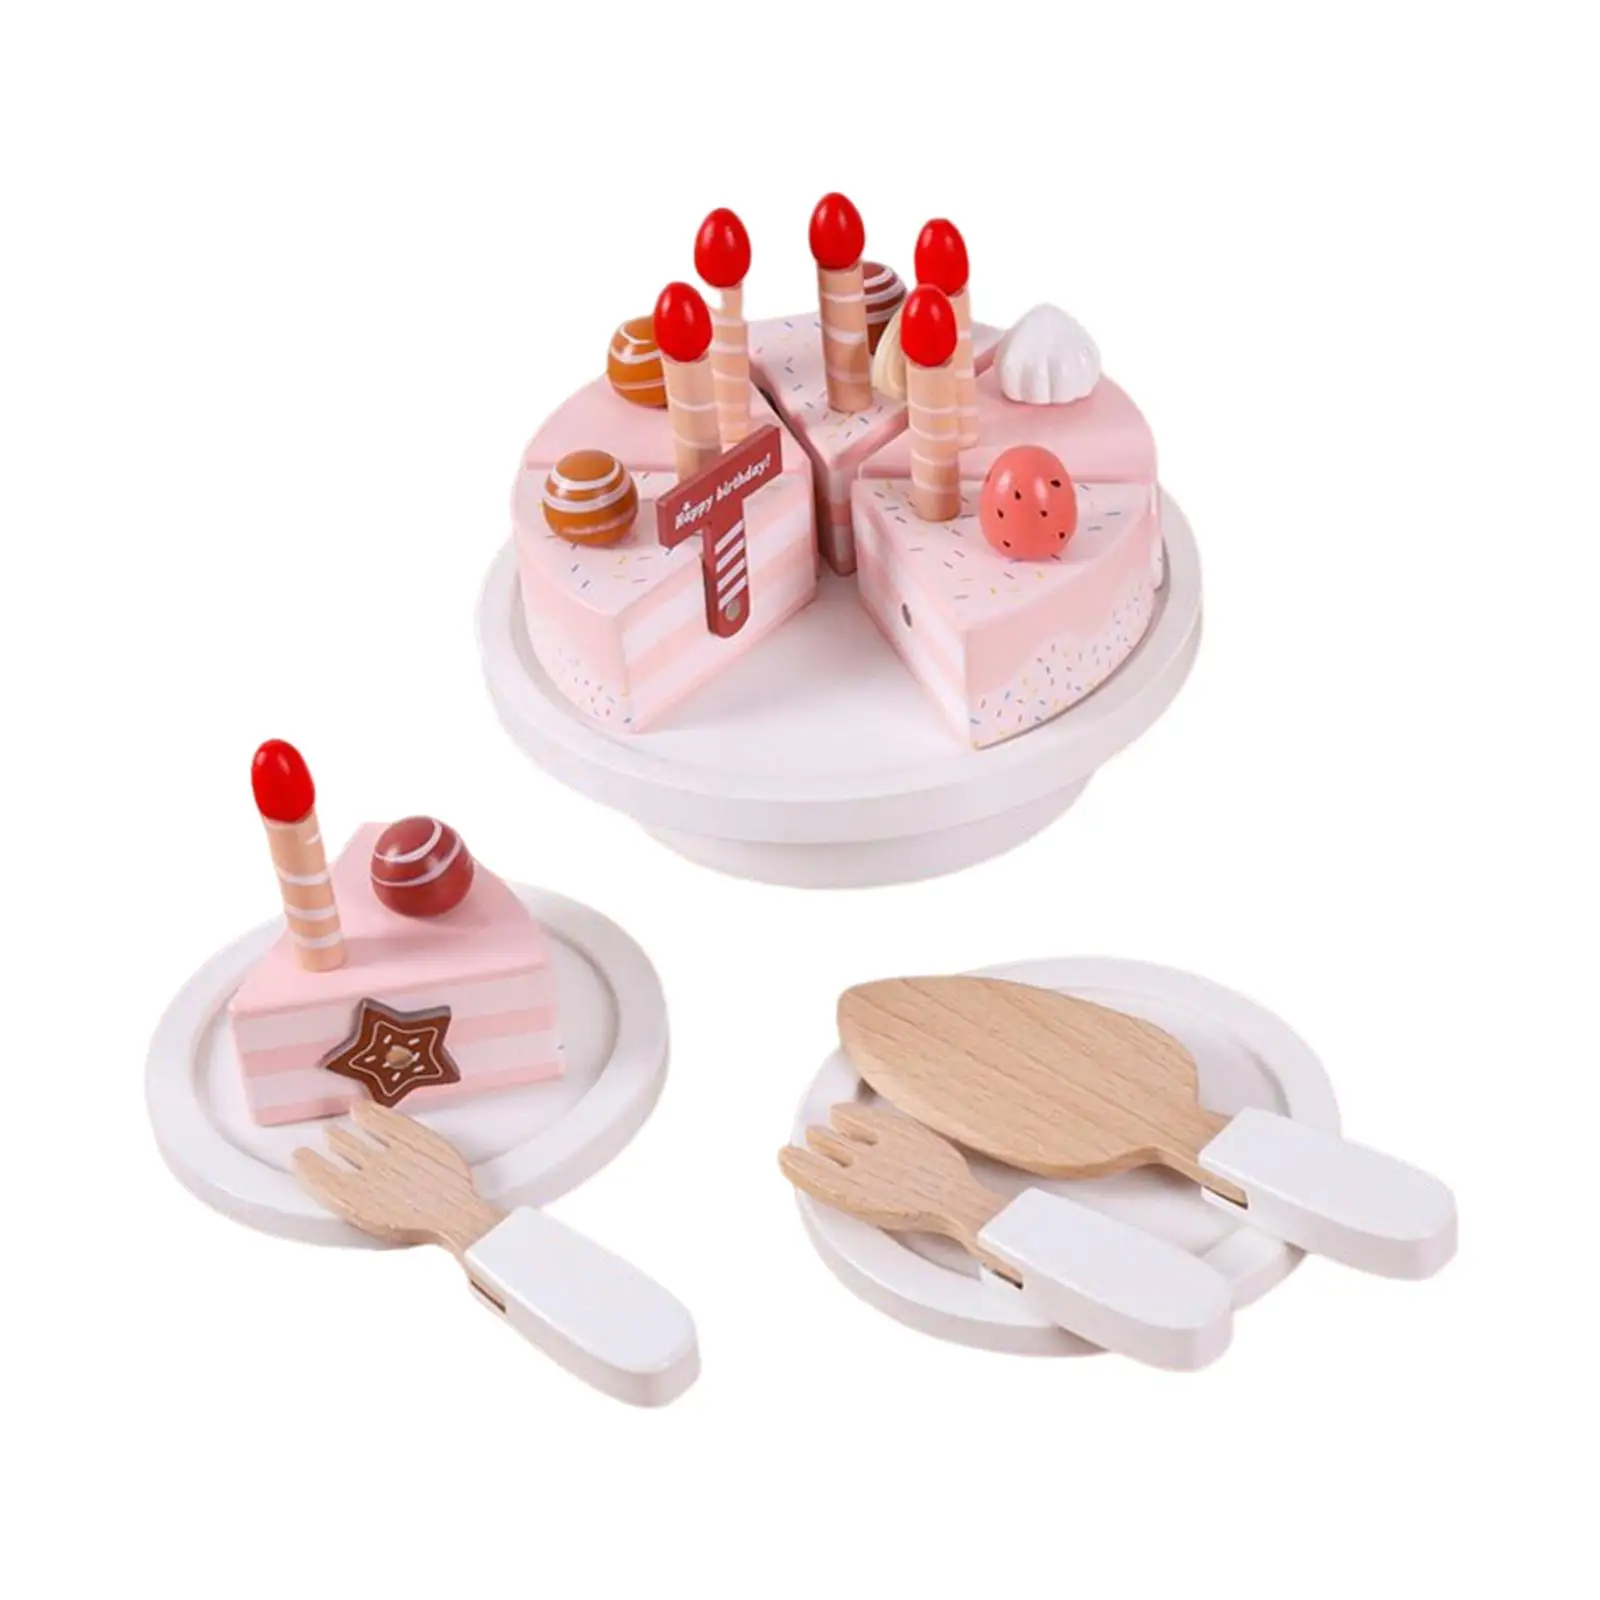 Simulation Wooden Birthday Cake Toys with Candles Role Play Toys Pretend Play Food Kitchen Toys for Toddlers Boys Birthday Gifts